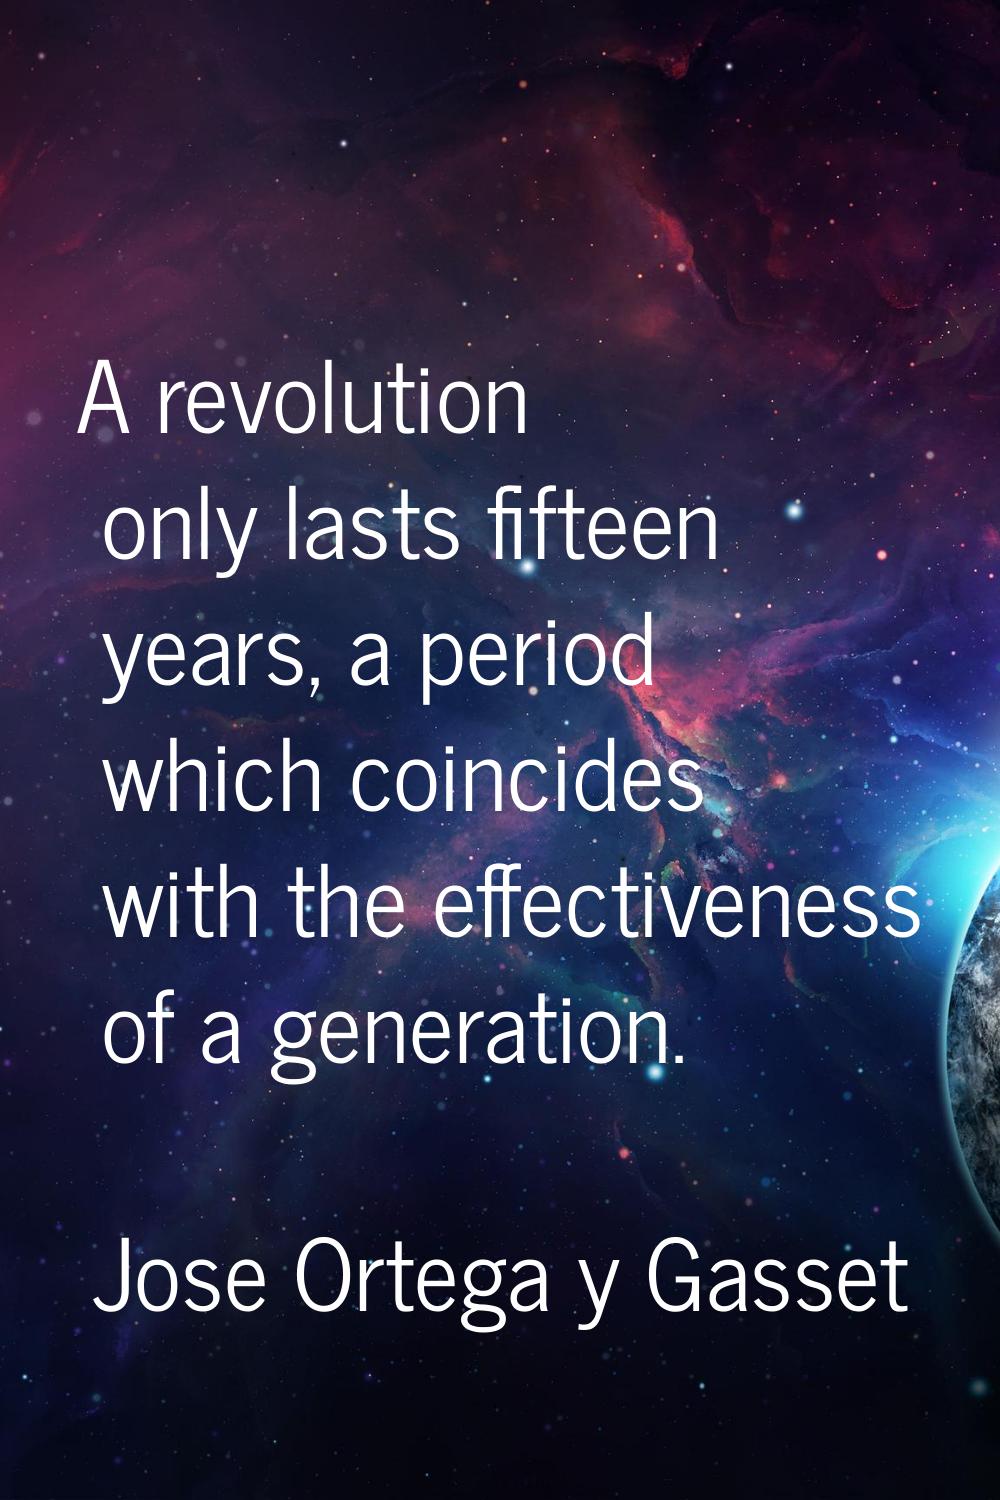 A revolution only lasts fifteen years, a period which coincides with the effectiveness of a generat